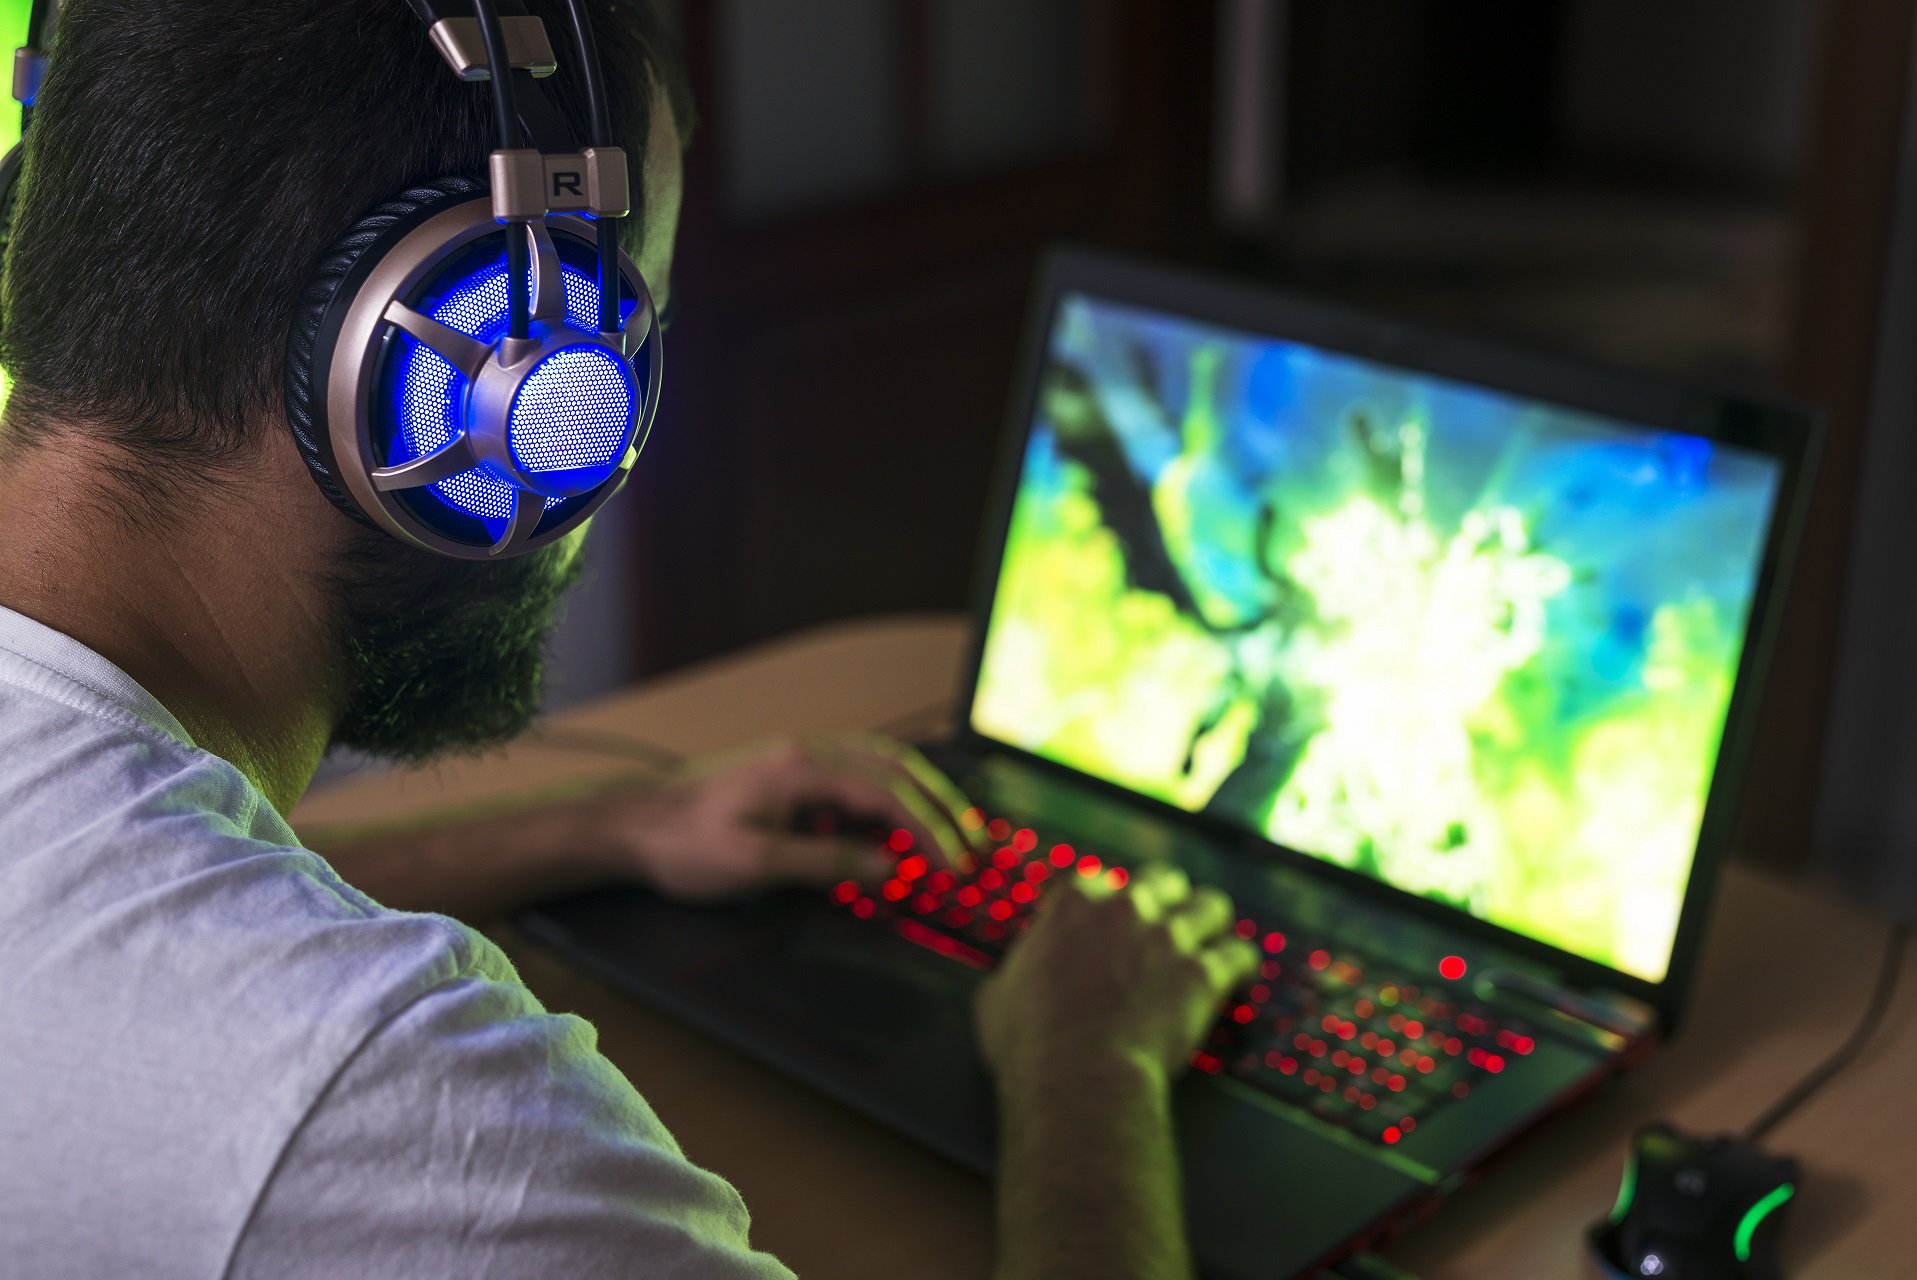 What are the best Windows 10 gaming laptops